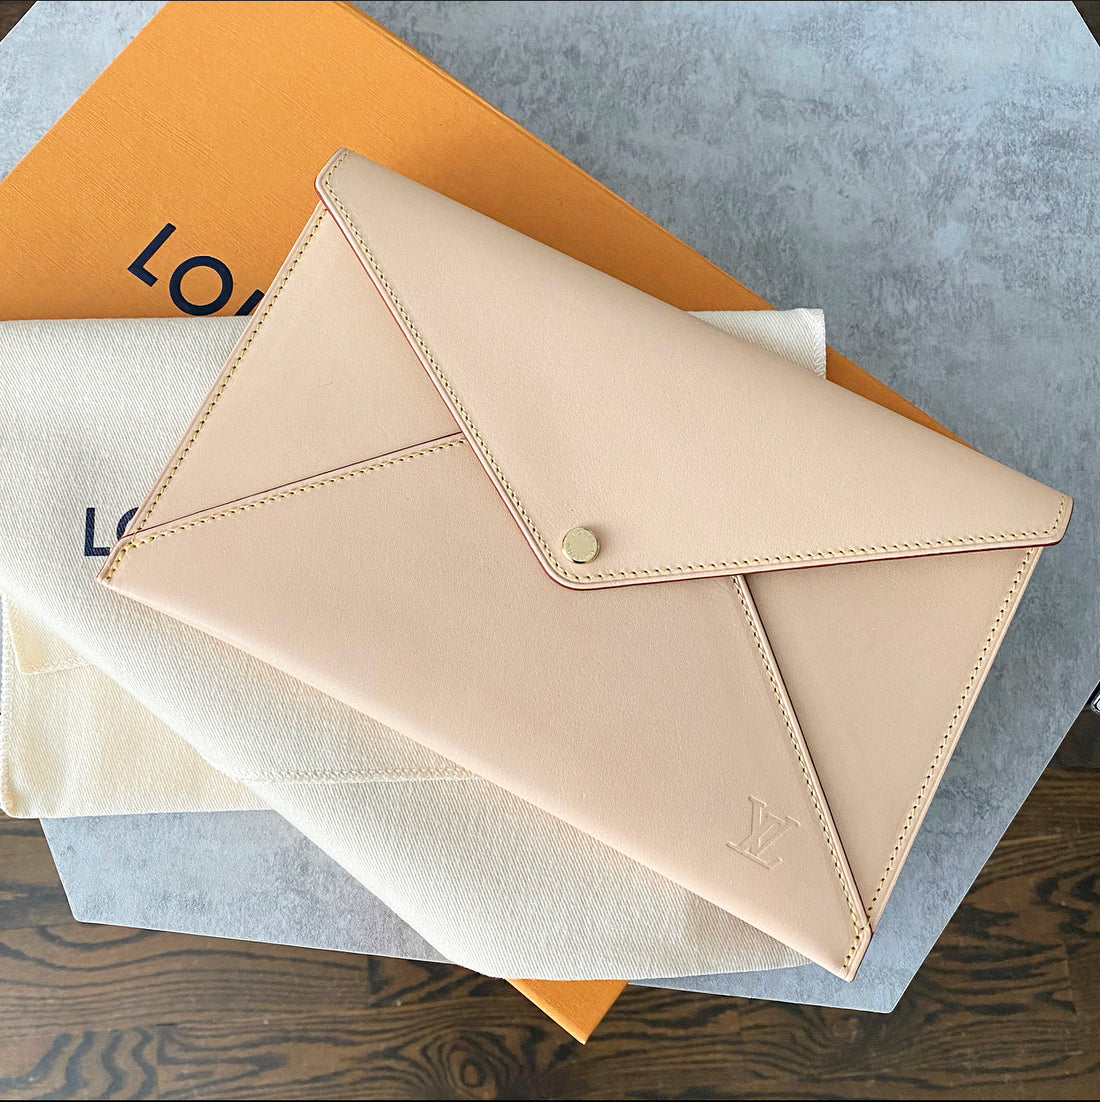 Buy Authentic Pre-owned Louis Vuitton Ltd Nomade Vachetta Leather Envelope  Travel Clutch Case 210020 from Japan - Buy authentic Plus exclusive items  from Japan